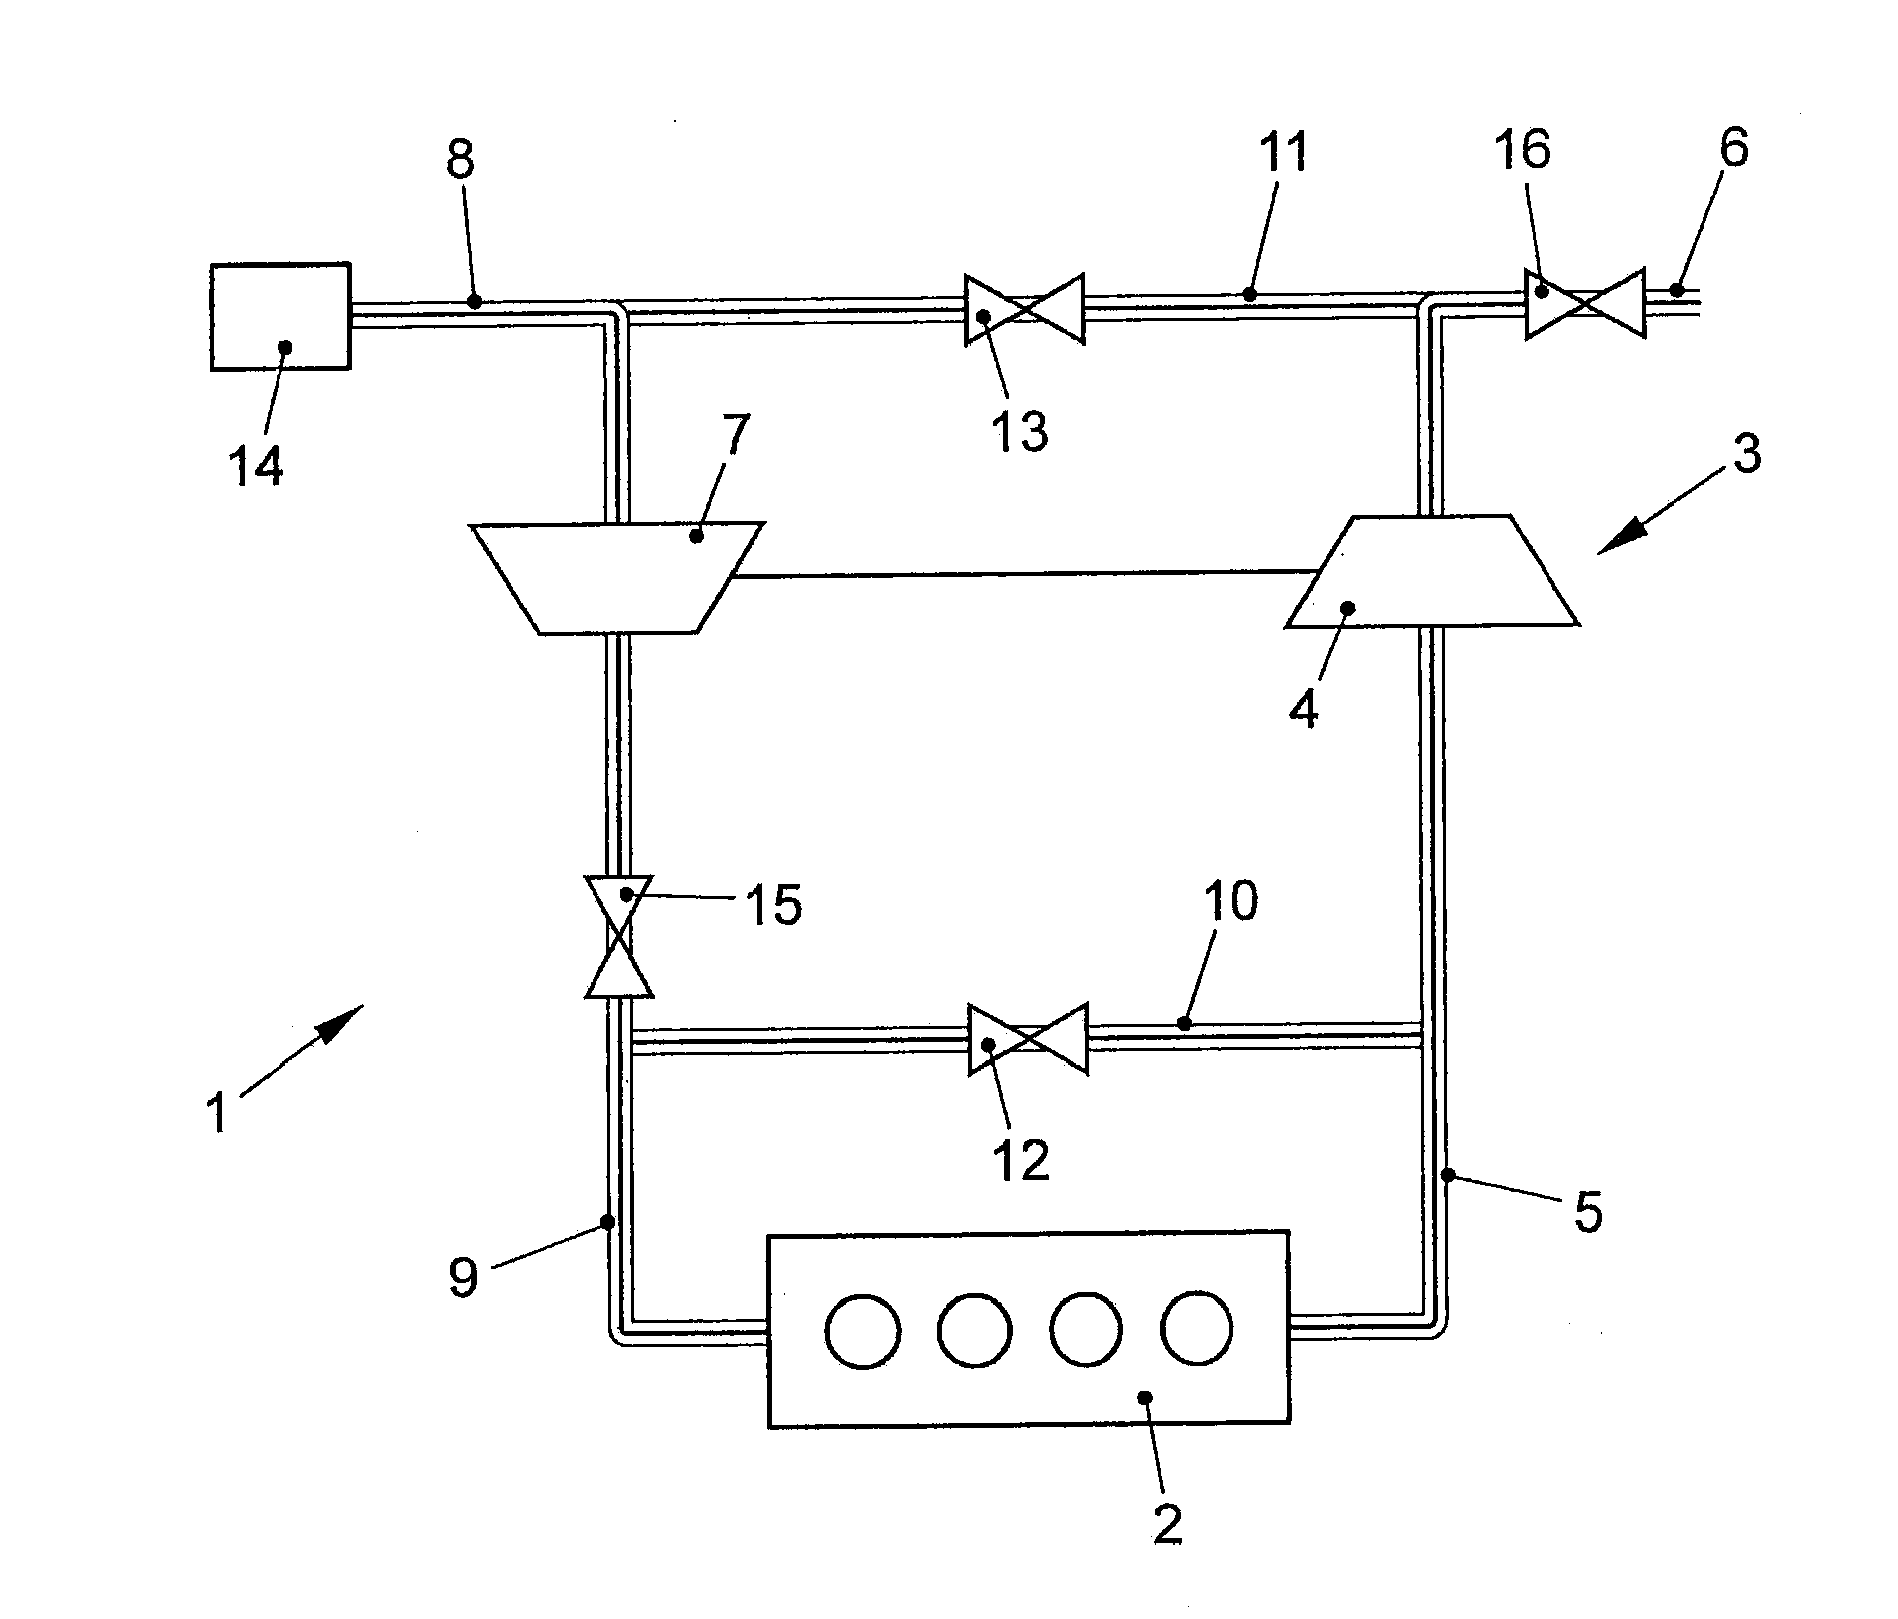 Method for Determining a Pressure at the Output of an Exhaust Gas System